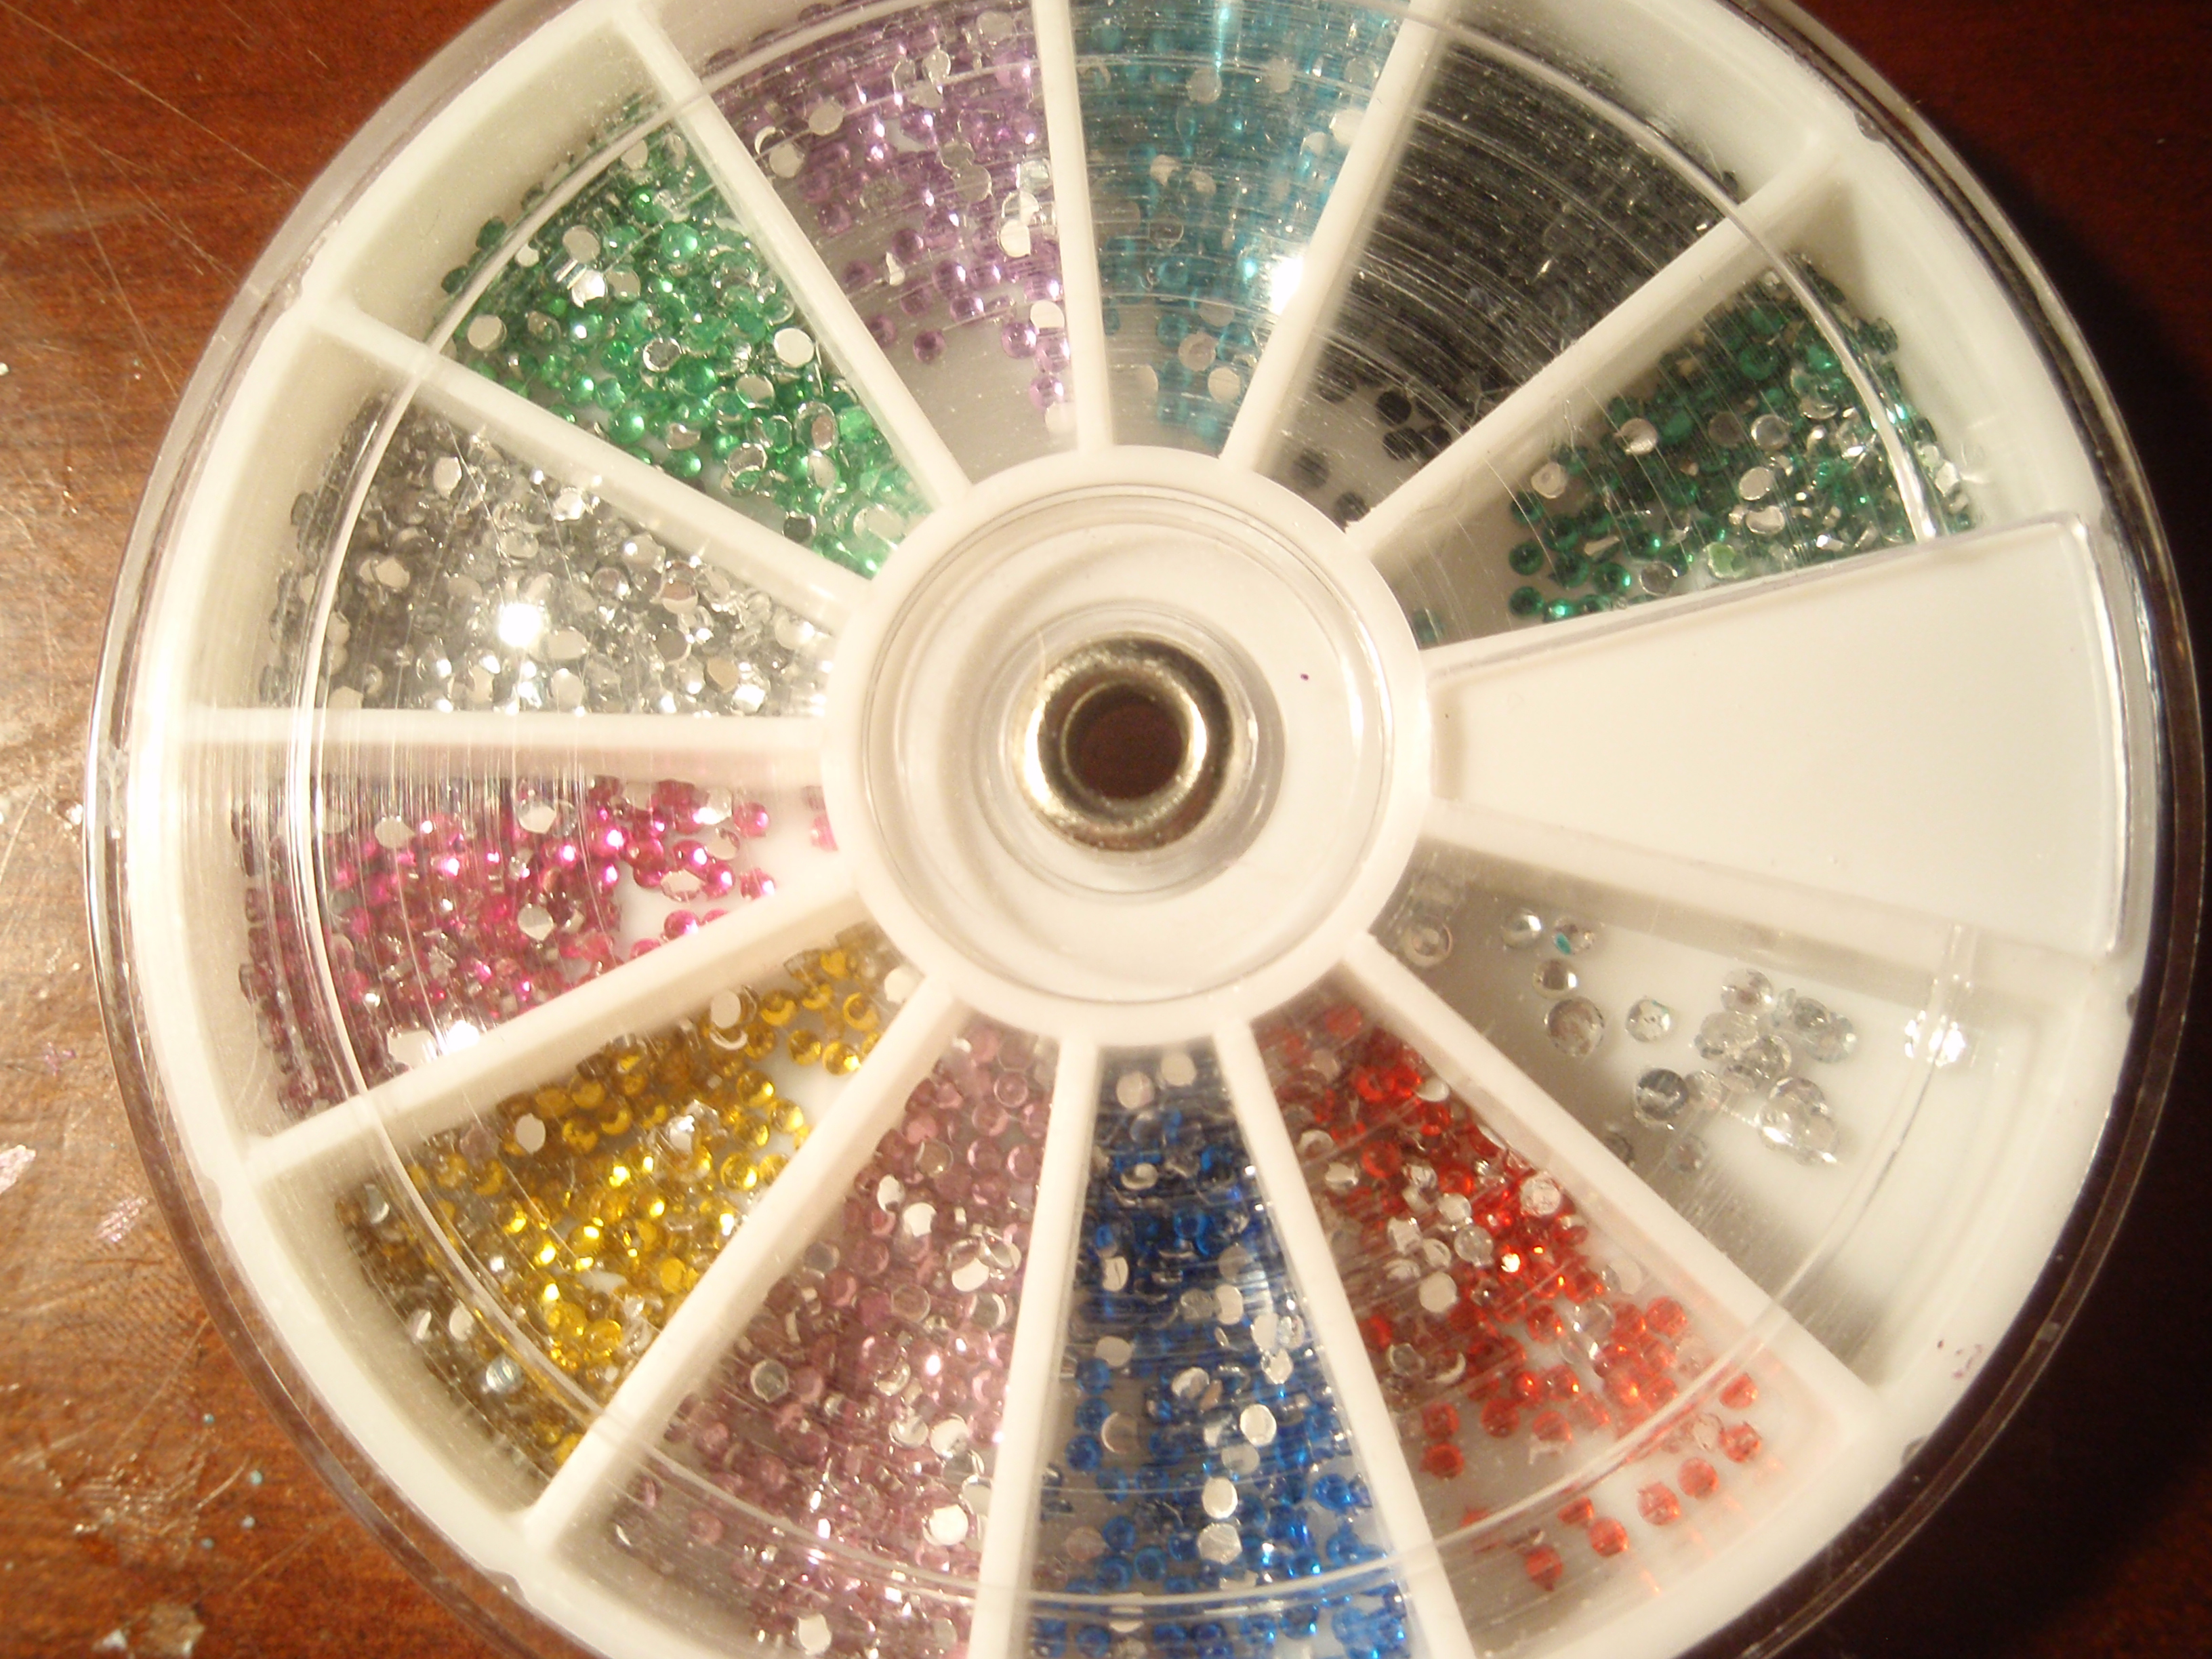 I only have one rhinestone wheel and the rhinestones I got from Walgreens